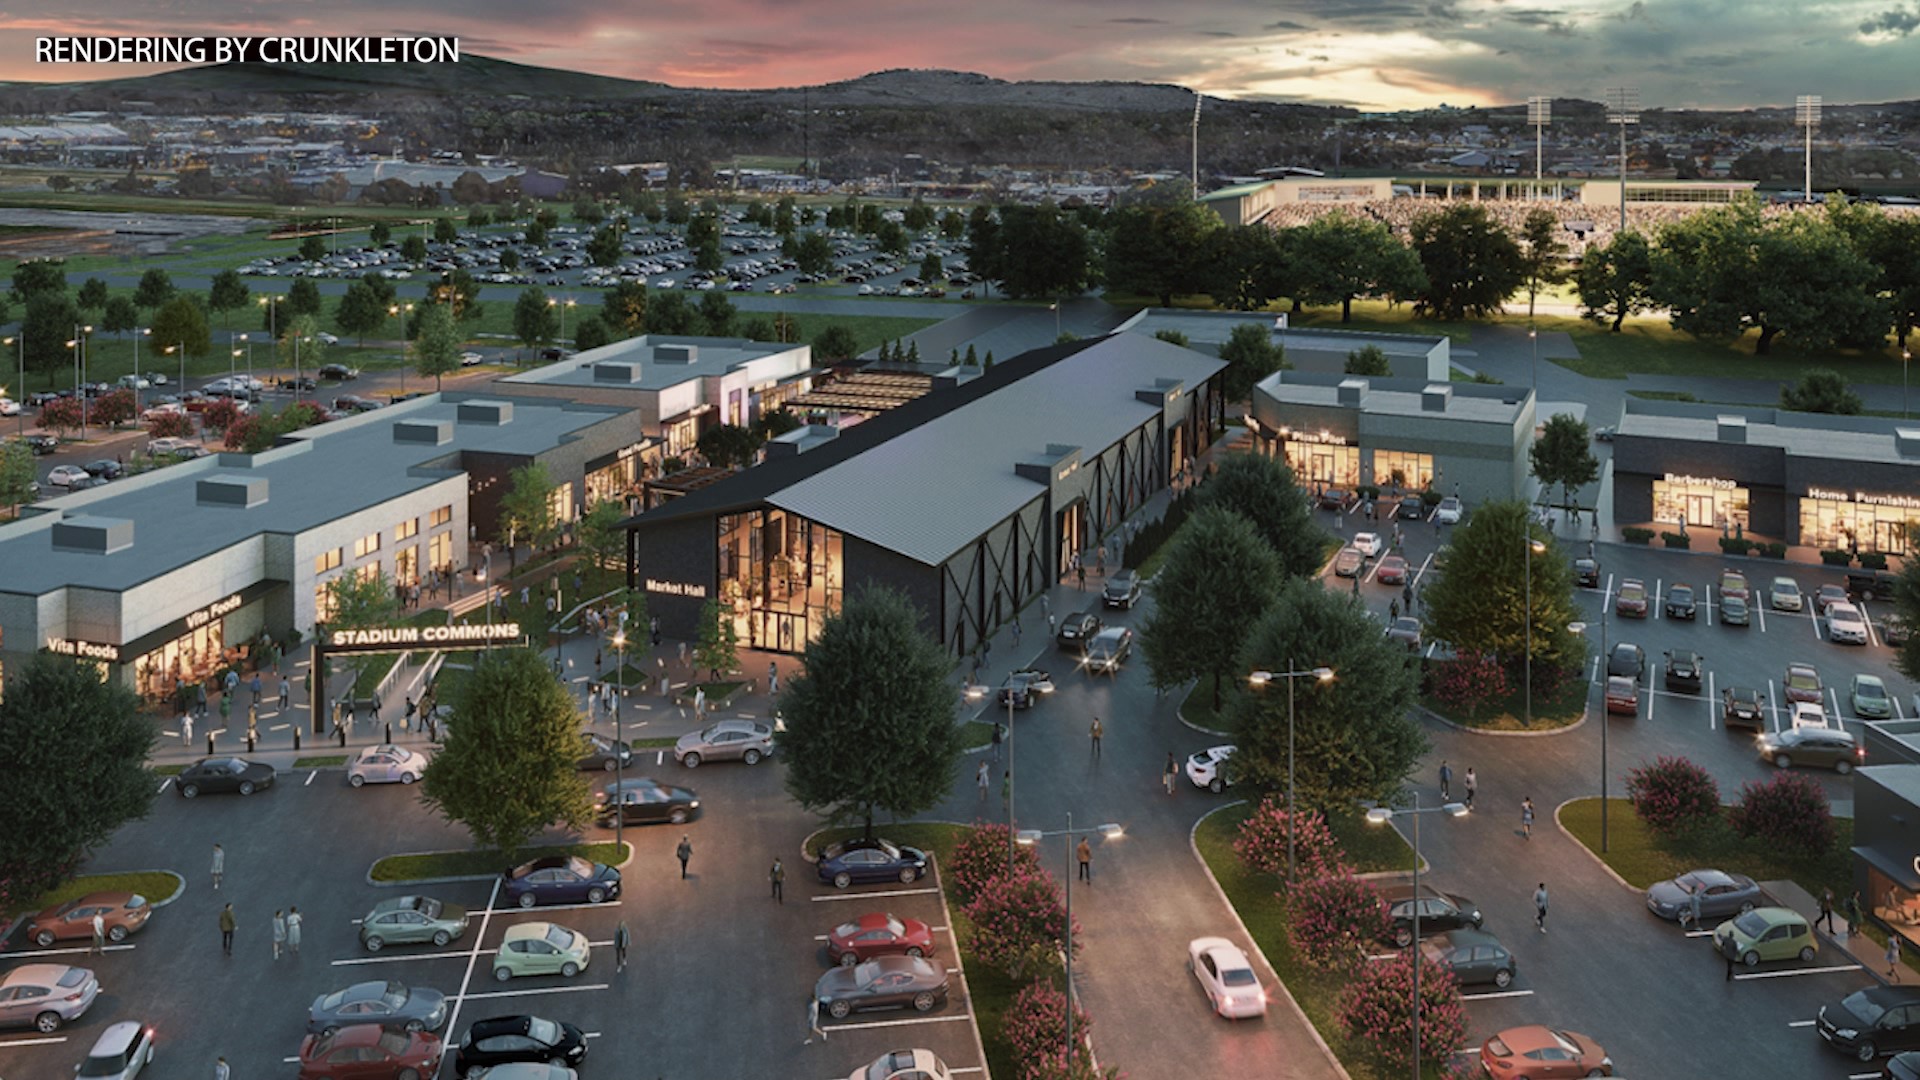 'Stadium Commons' will occupy the space formerly taken by the Hollywood 18 movie theater and the Century Plaza office complex.